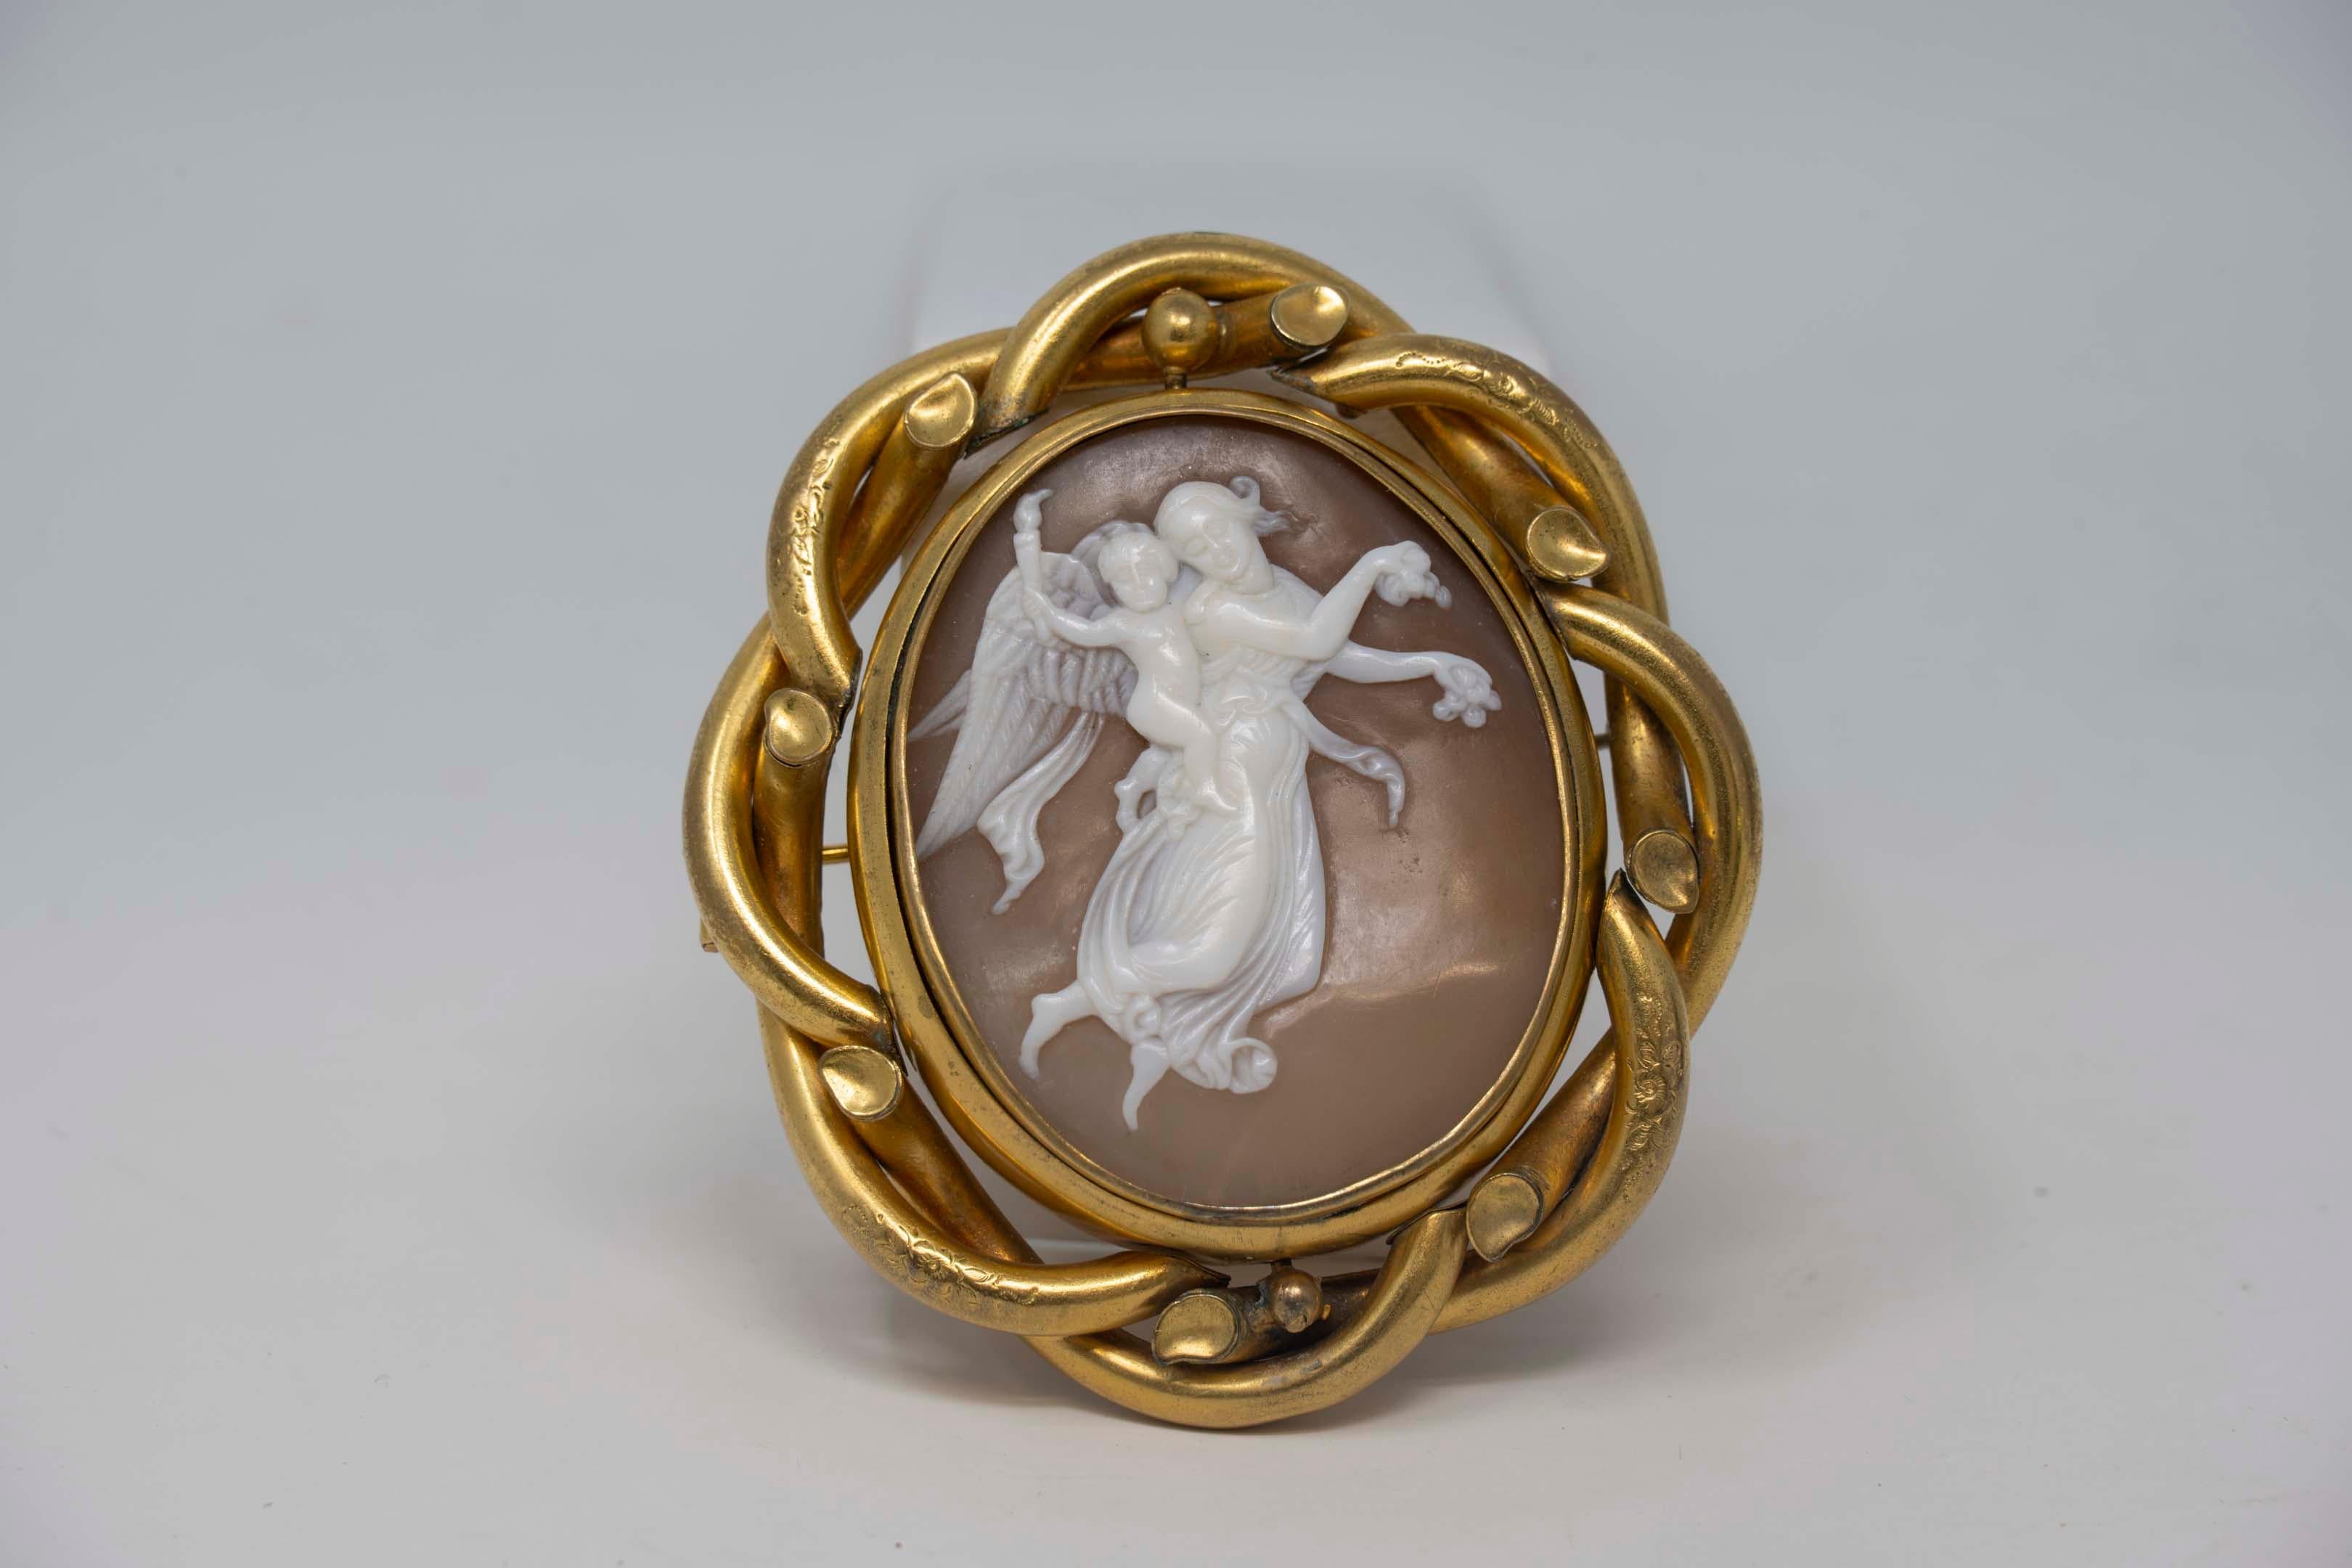 Victorian gold-plated cameo carving of Venus & cupid mourning brooch pendant. The center turn as showing on the photo on the back is sealed with crystal, no mark found, circa 1880. In good condition, brooch measures 7.2 cm x 6.5 cm. The cameo